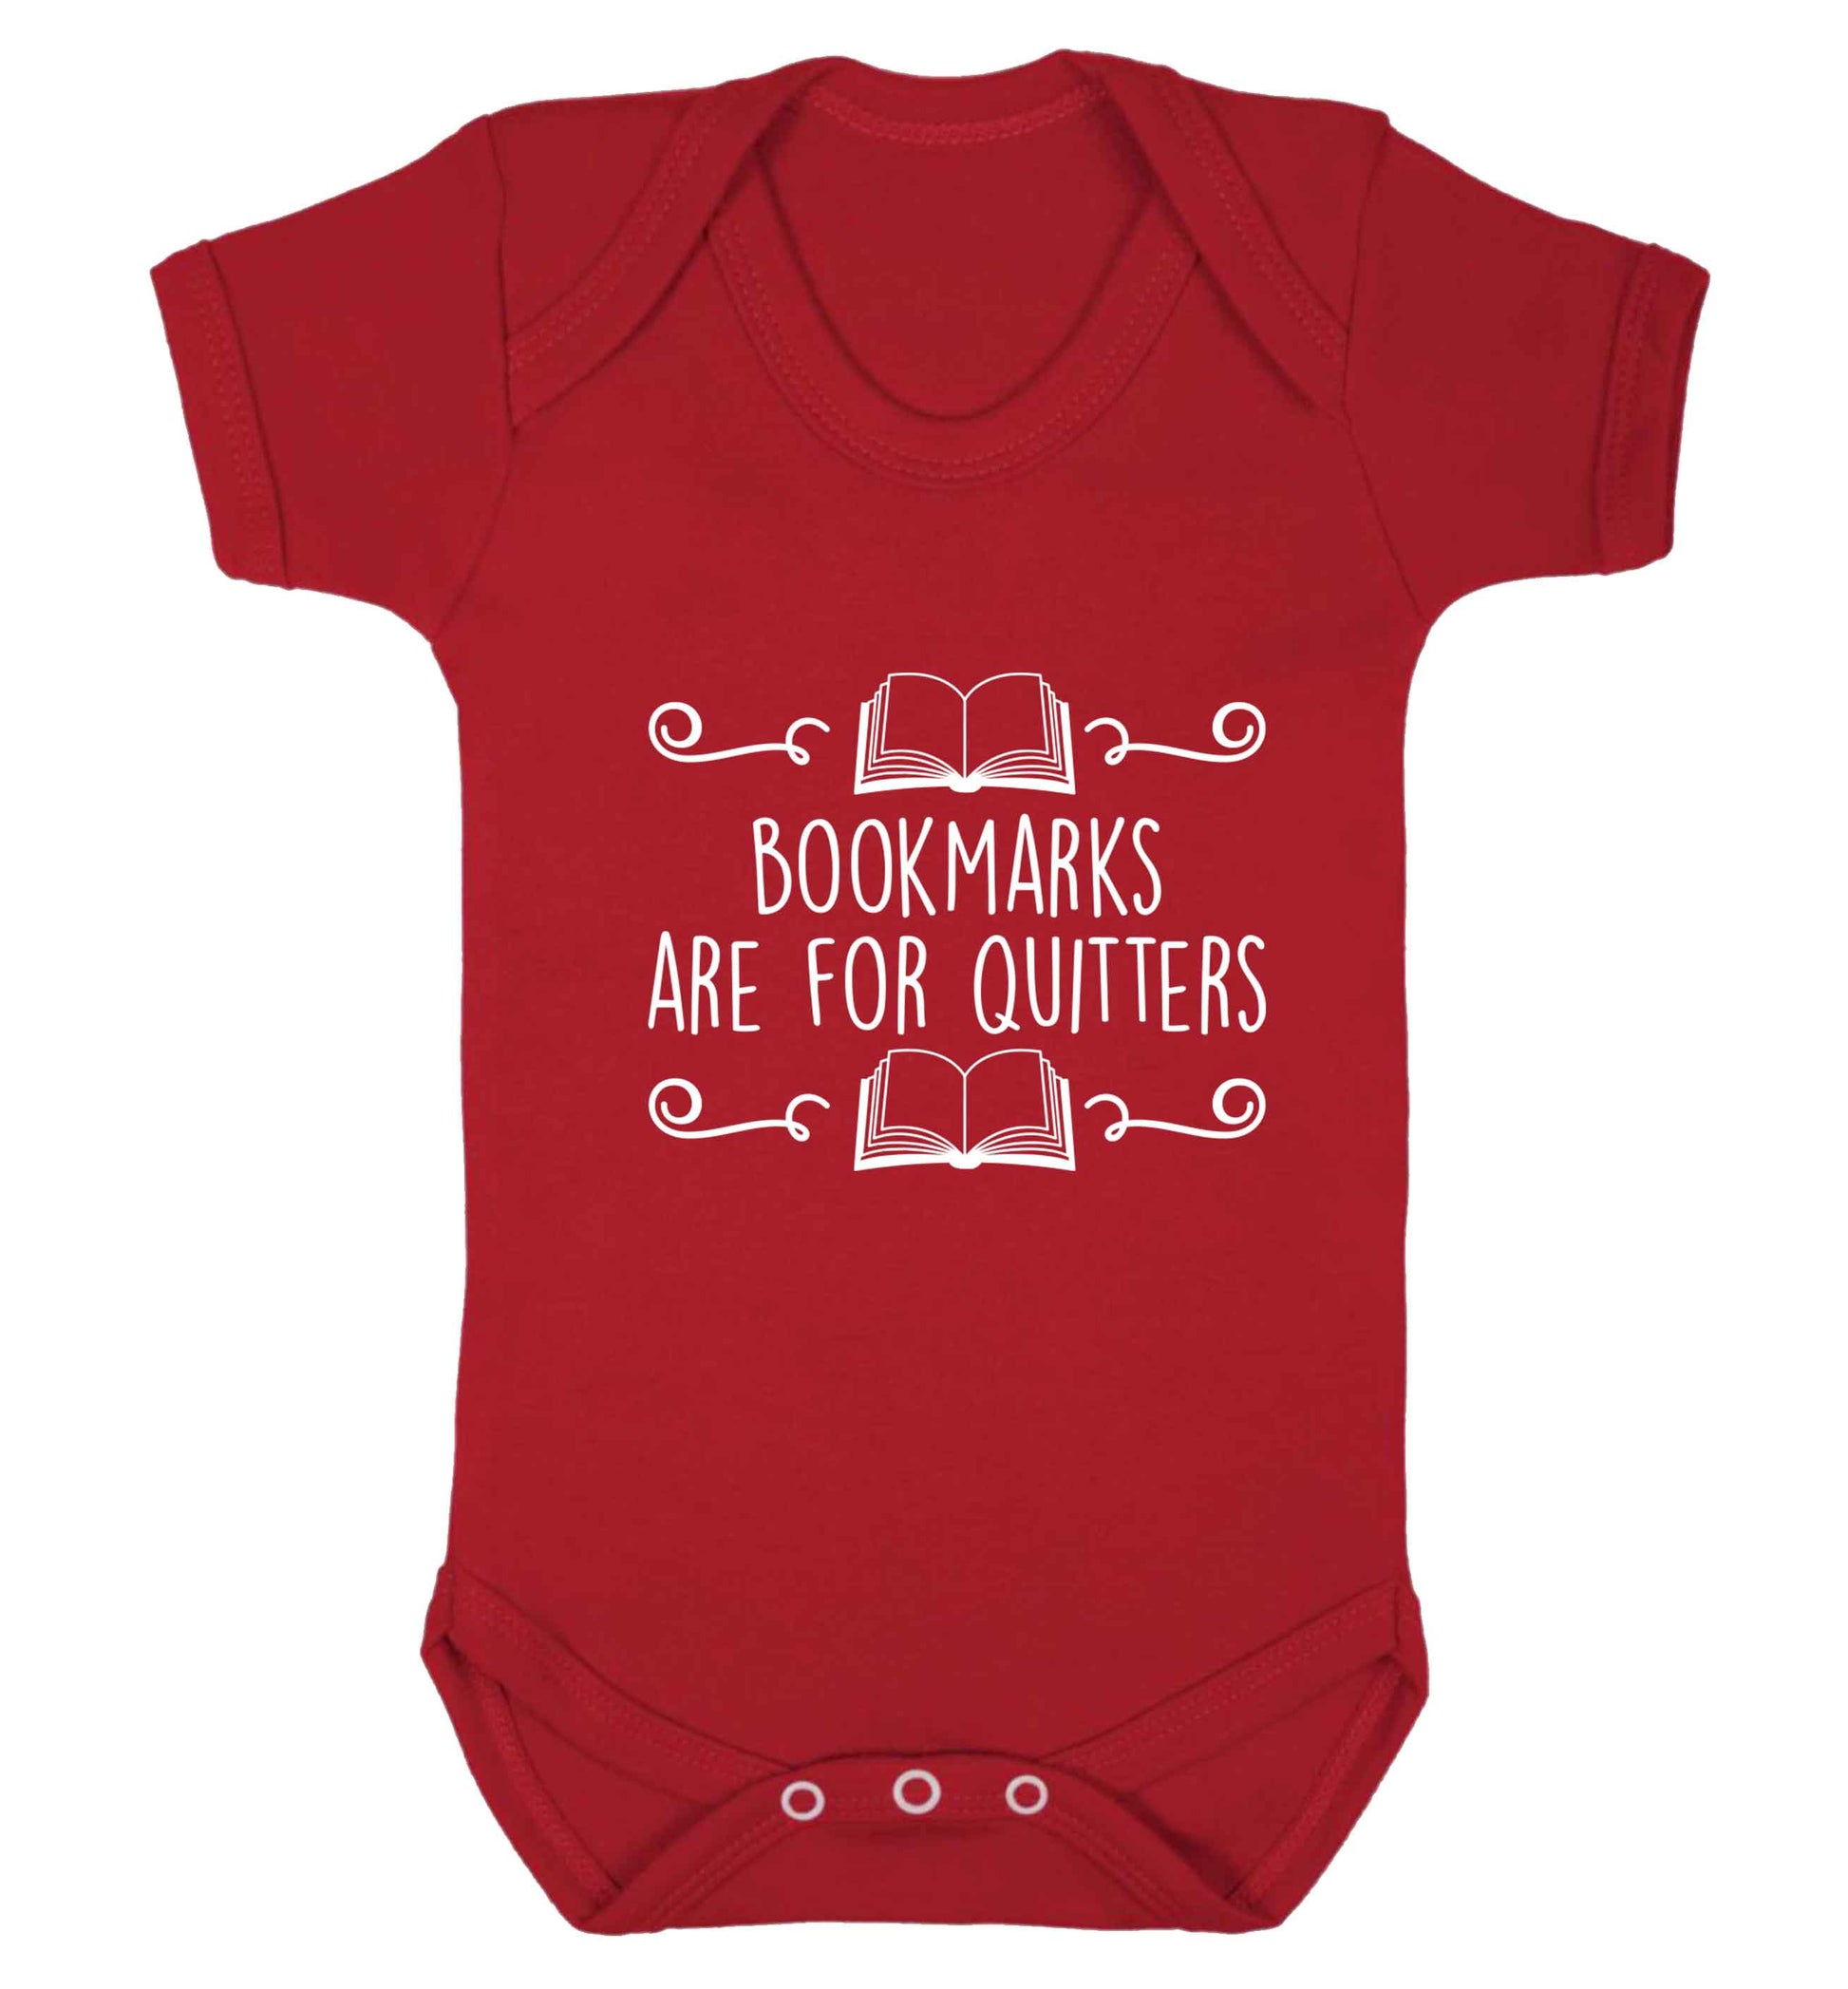 Bookmarks are for quitters baby vest red 18-24 months